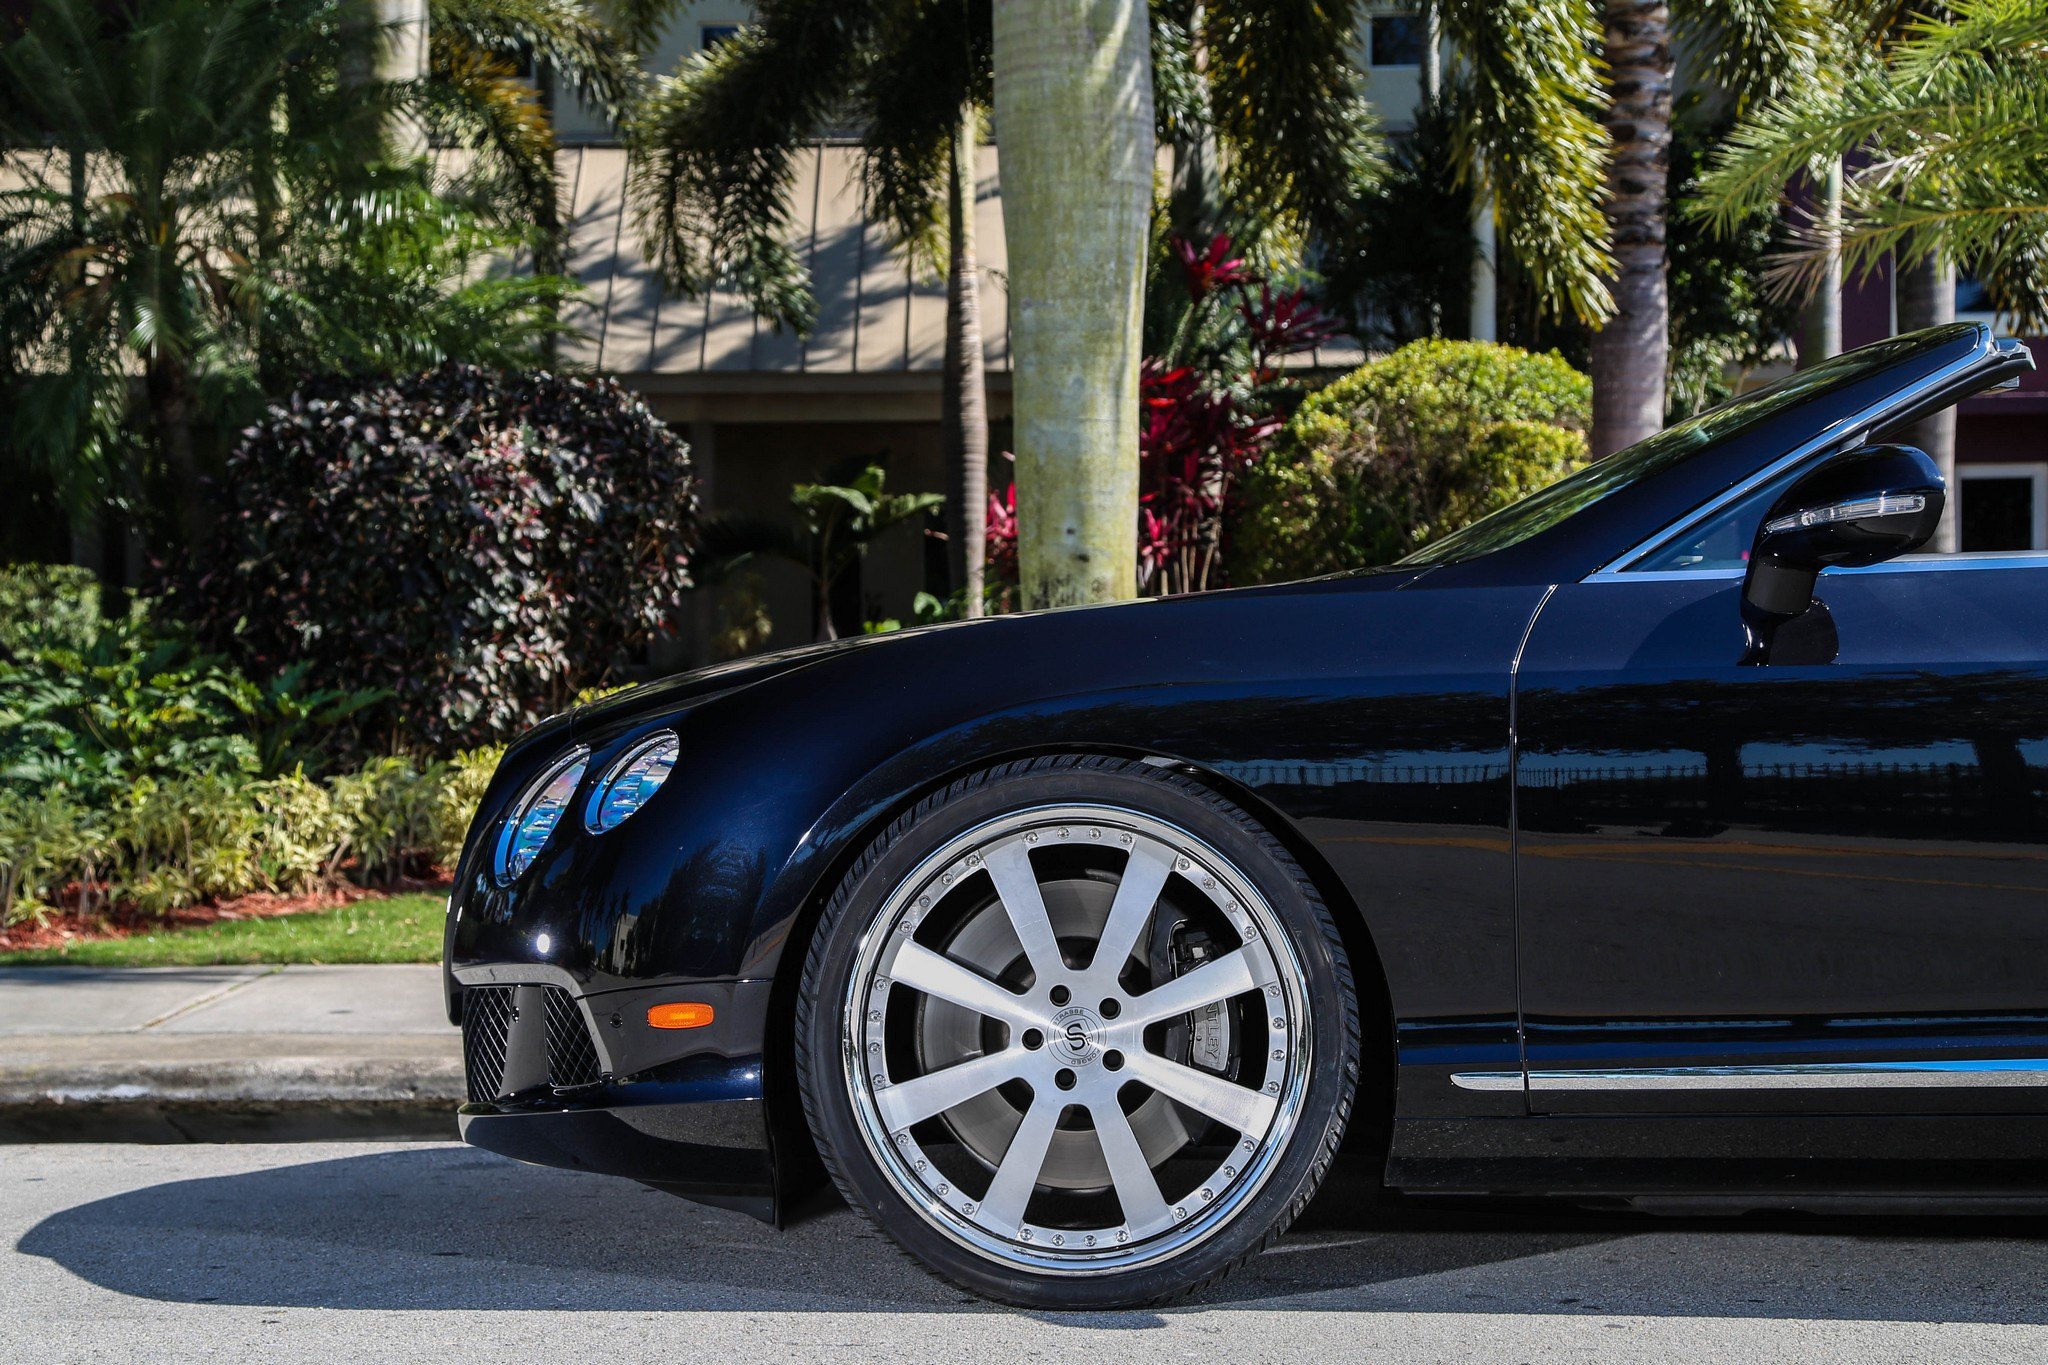 Chrome Forged Strasse Rims on Black Bentley Continental - Photo by Strasse Forged